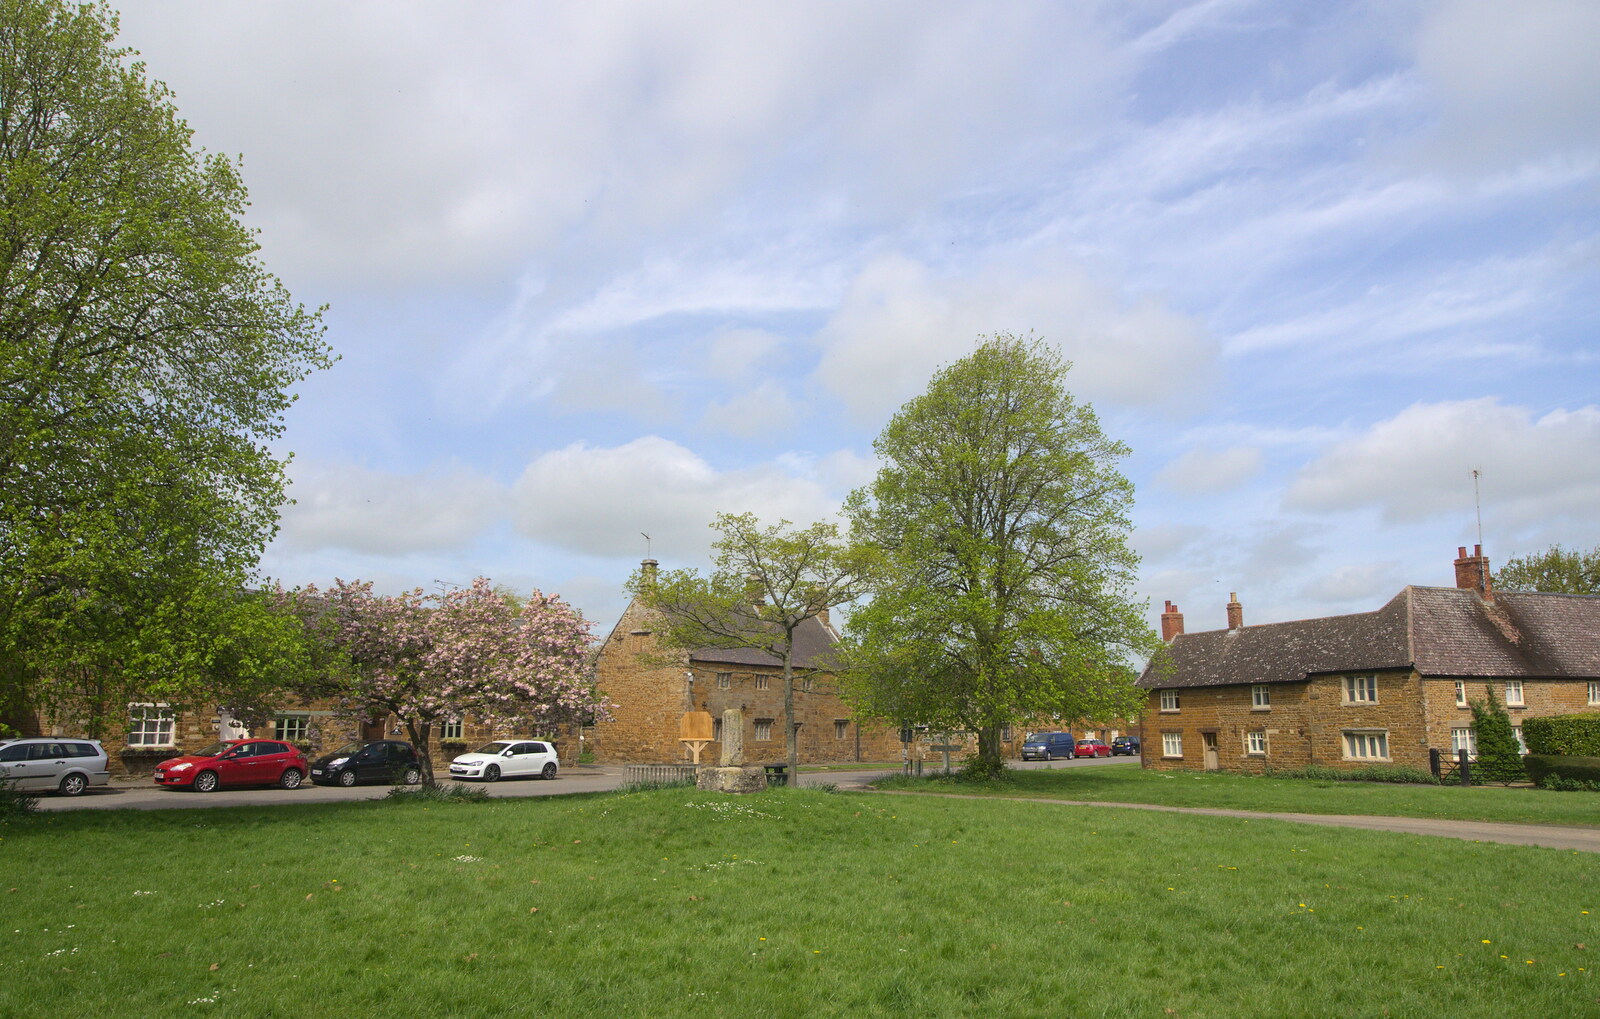 Lyddington's village green from The BSCC Weekend Away, Lyddington, Rutland - 9th May 2015